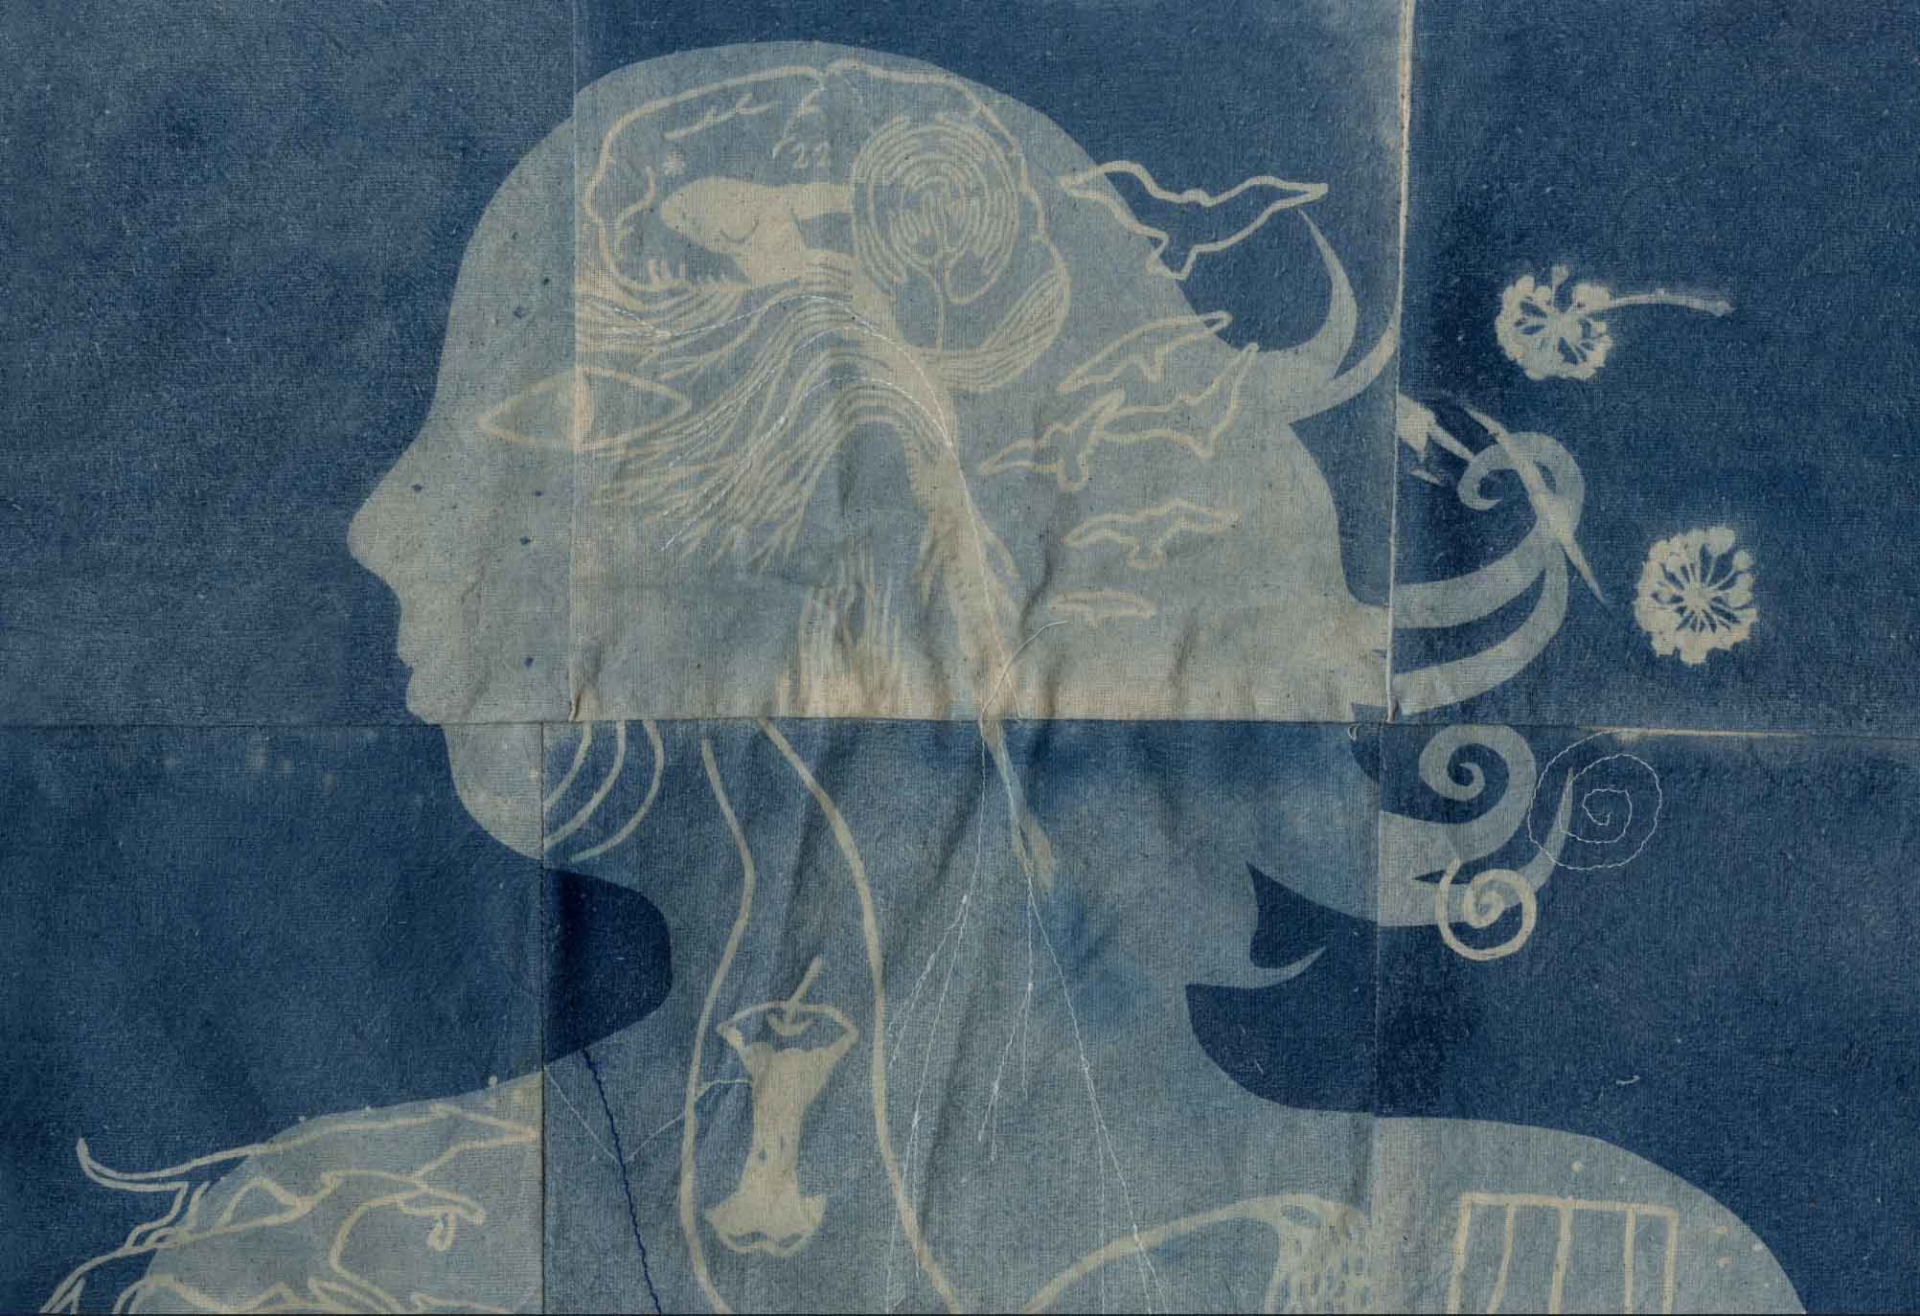 Cyanotype quilt of woman's face and interests